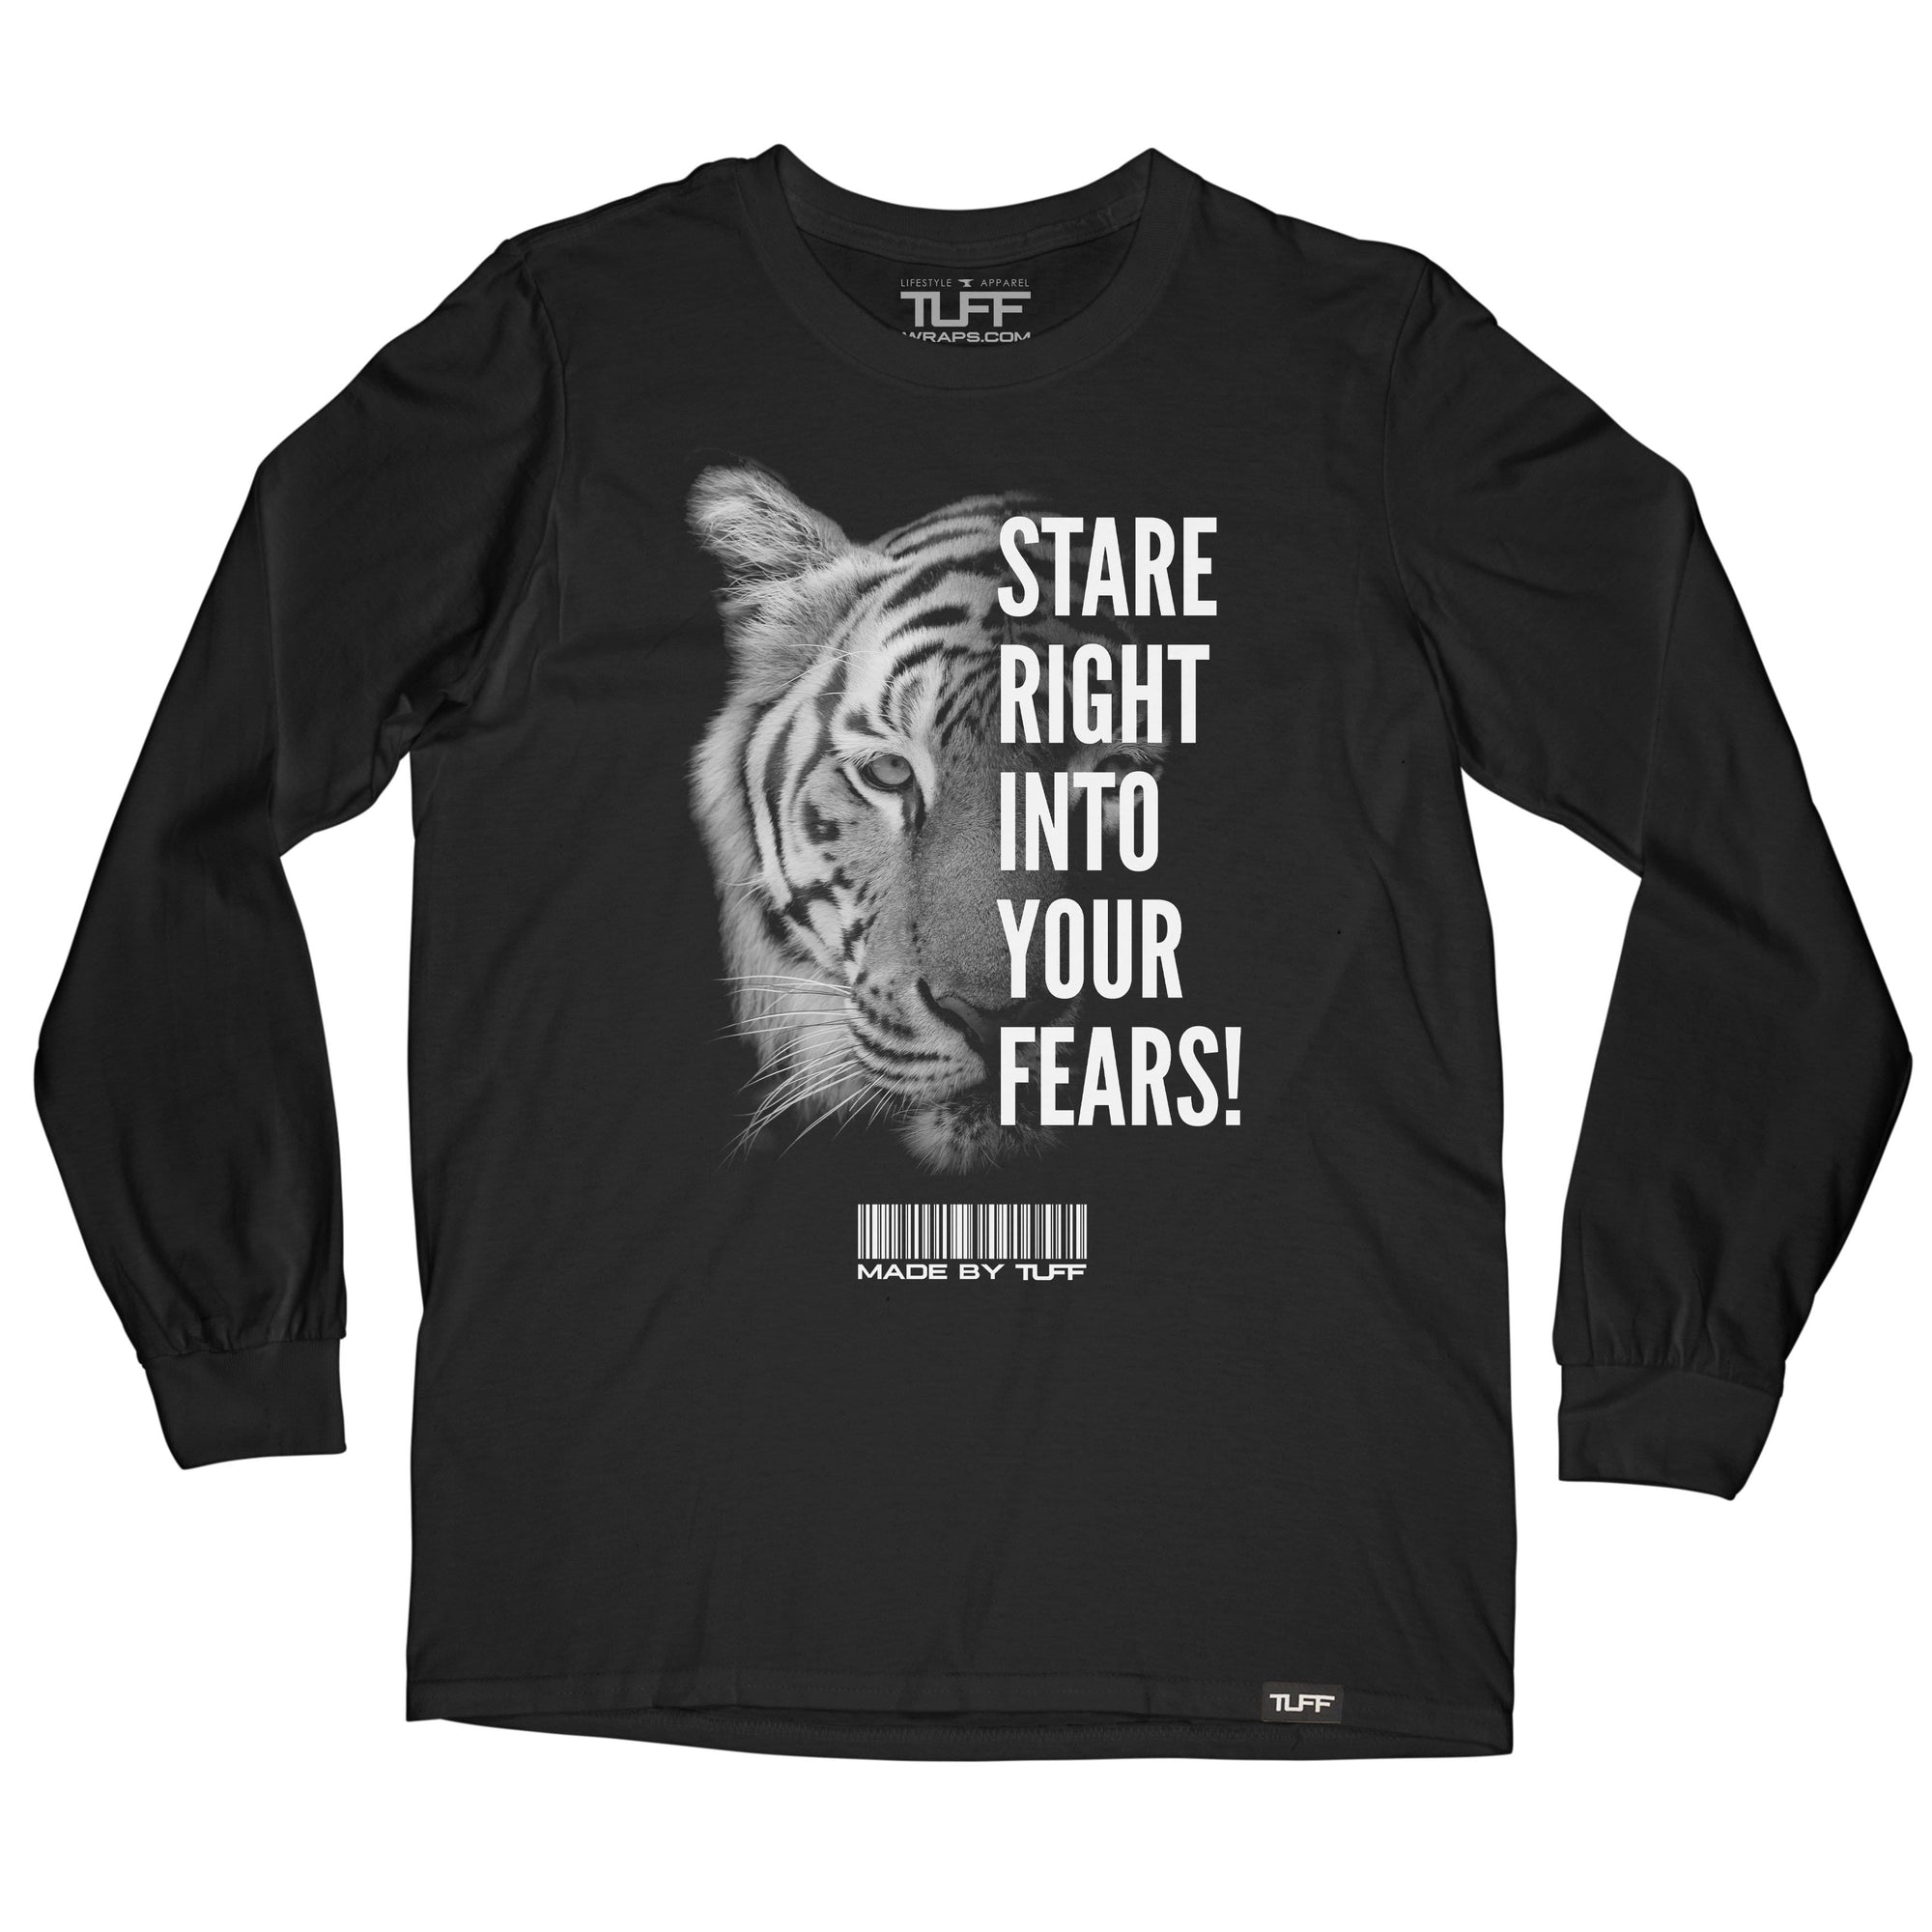 Stare Into Your Fears Long Sleeve Tee Men's Long Sleeve T-Shirt